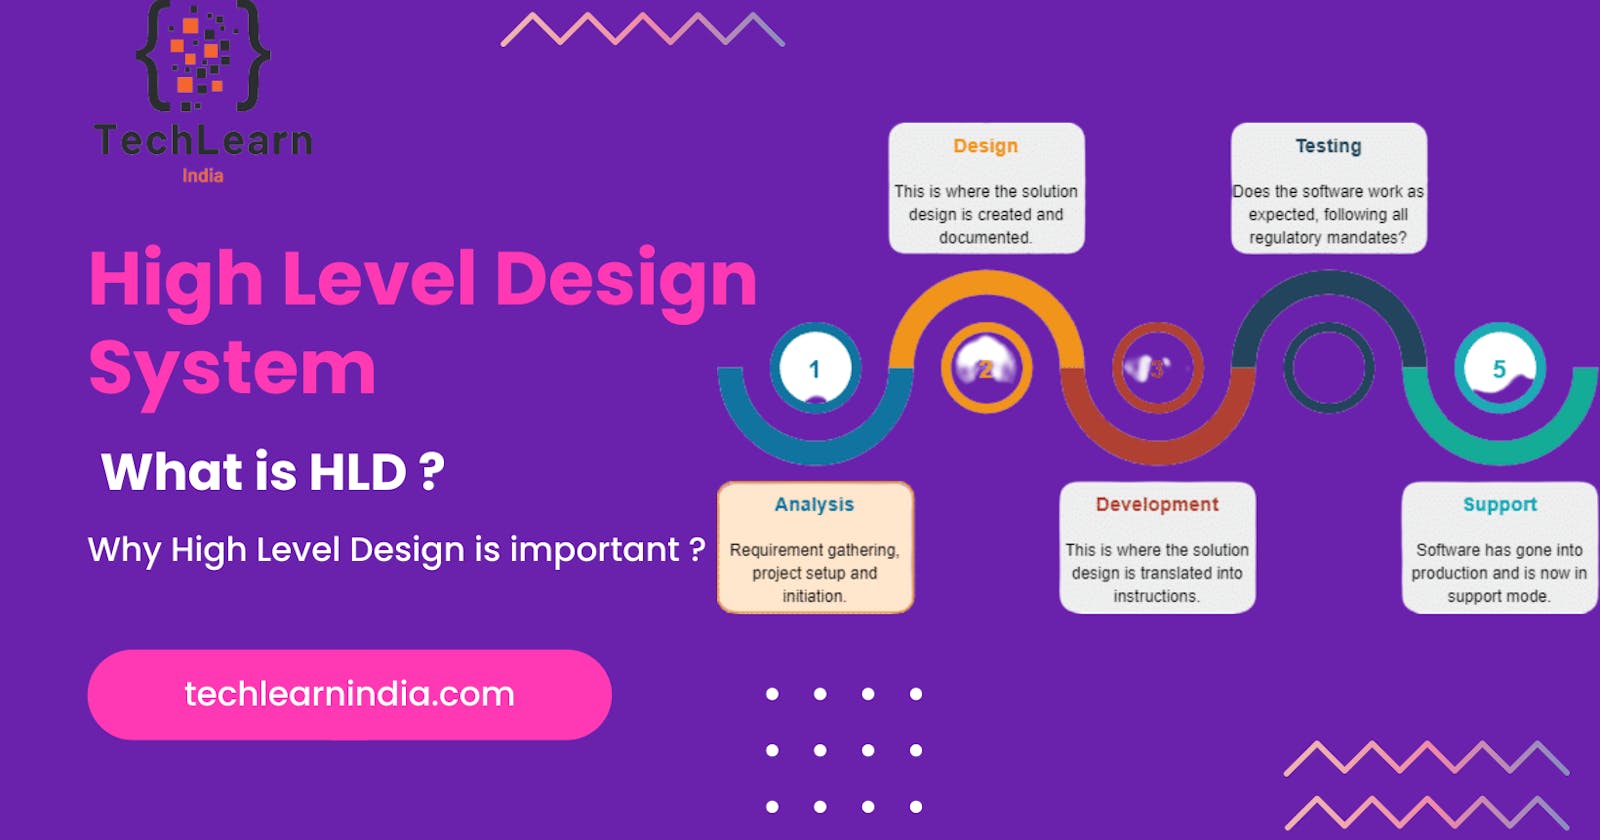 What's High Level Design System?